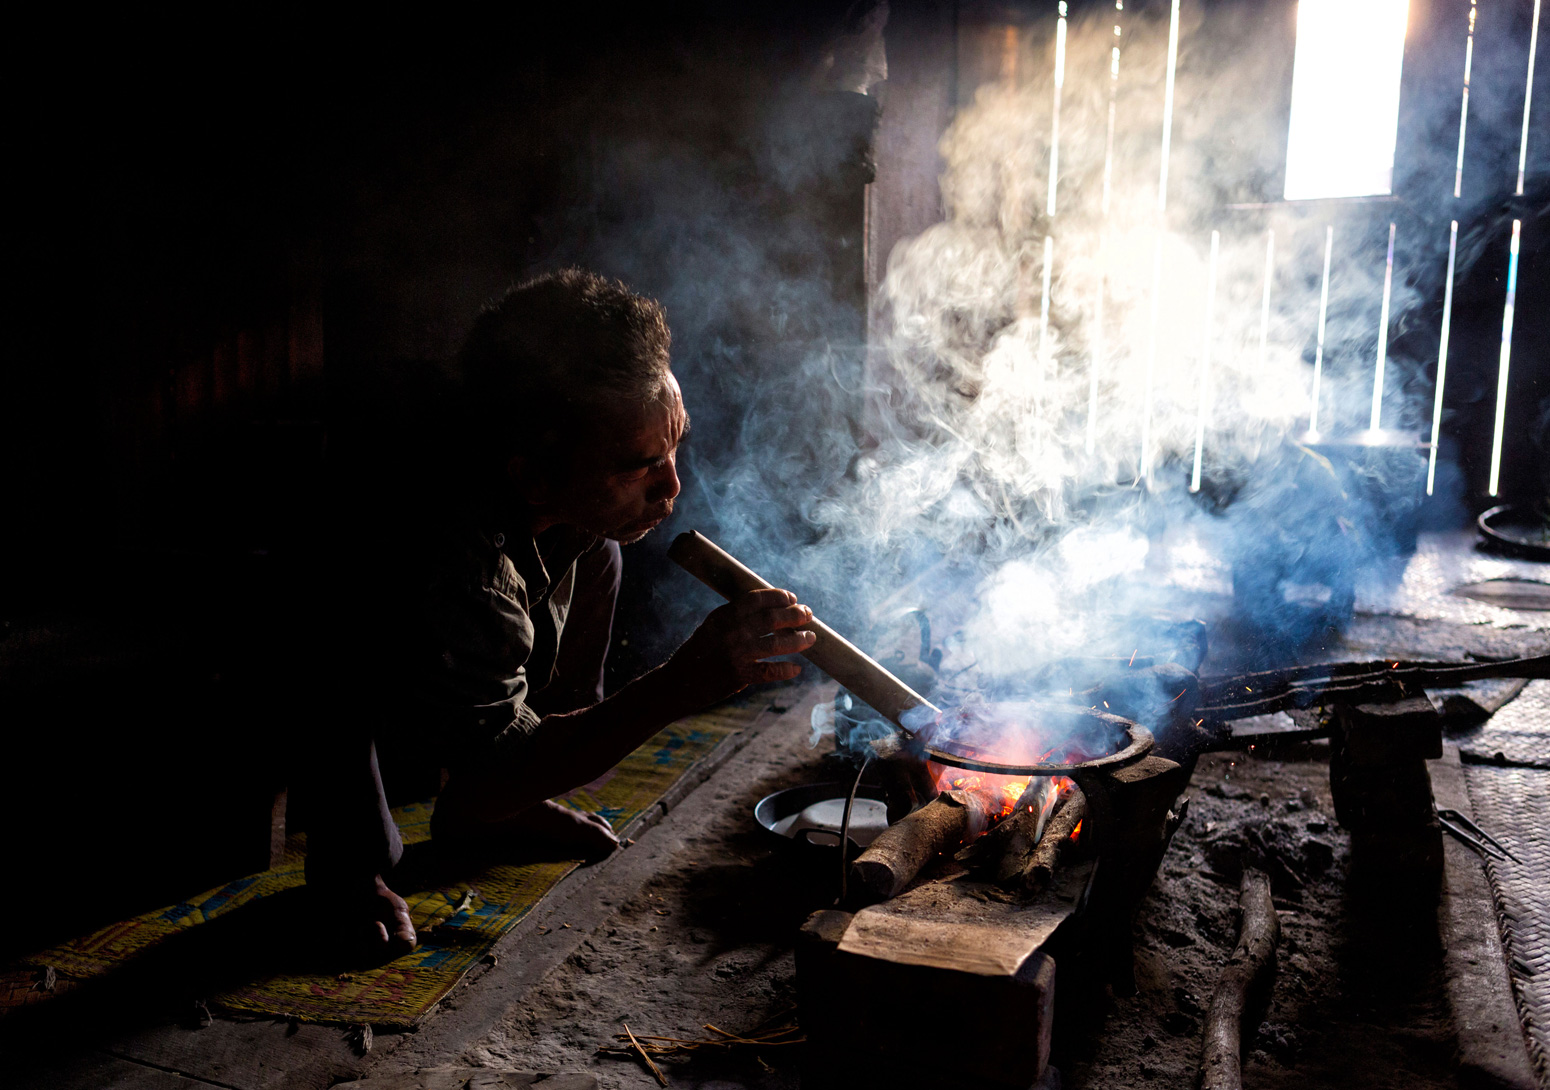 Man from the Palaung tribe cooking on open fire in a village near Kengtung, Burma